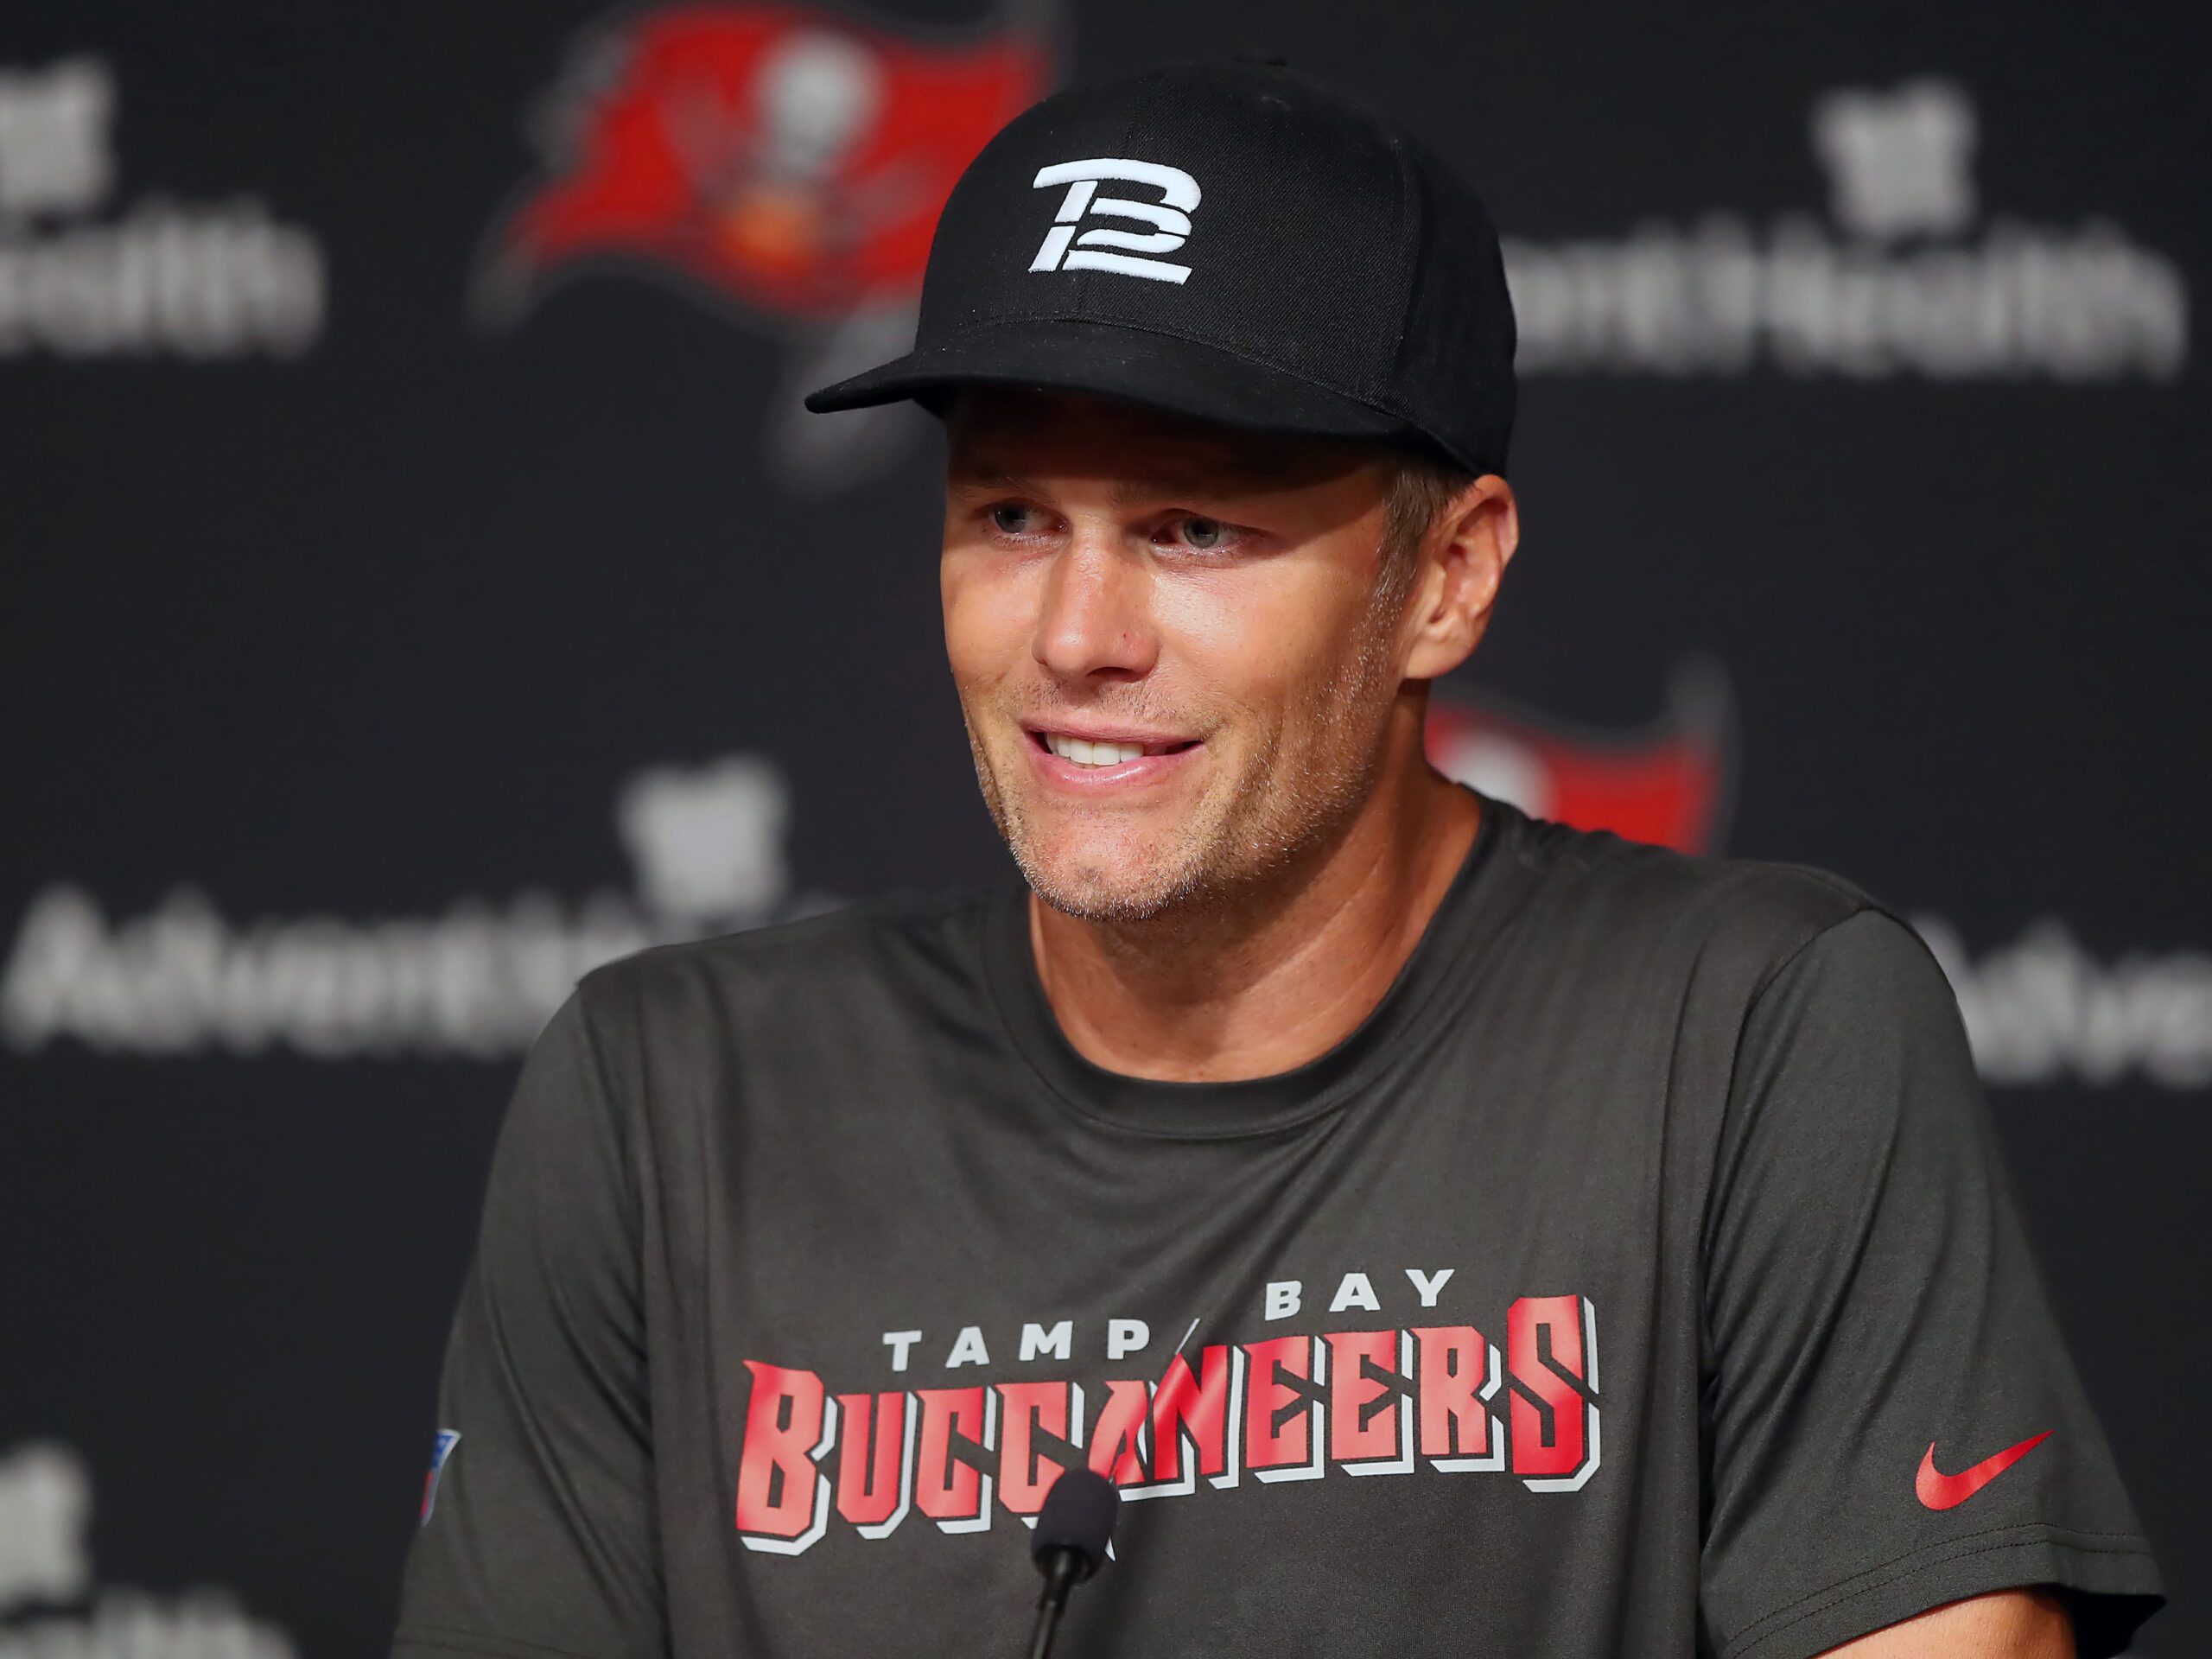 Tom Brady wears a black TB12 hat during a press conference.